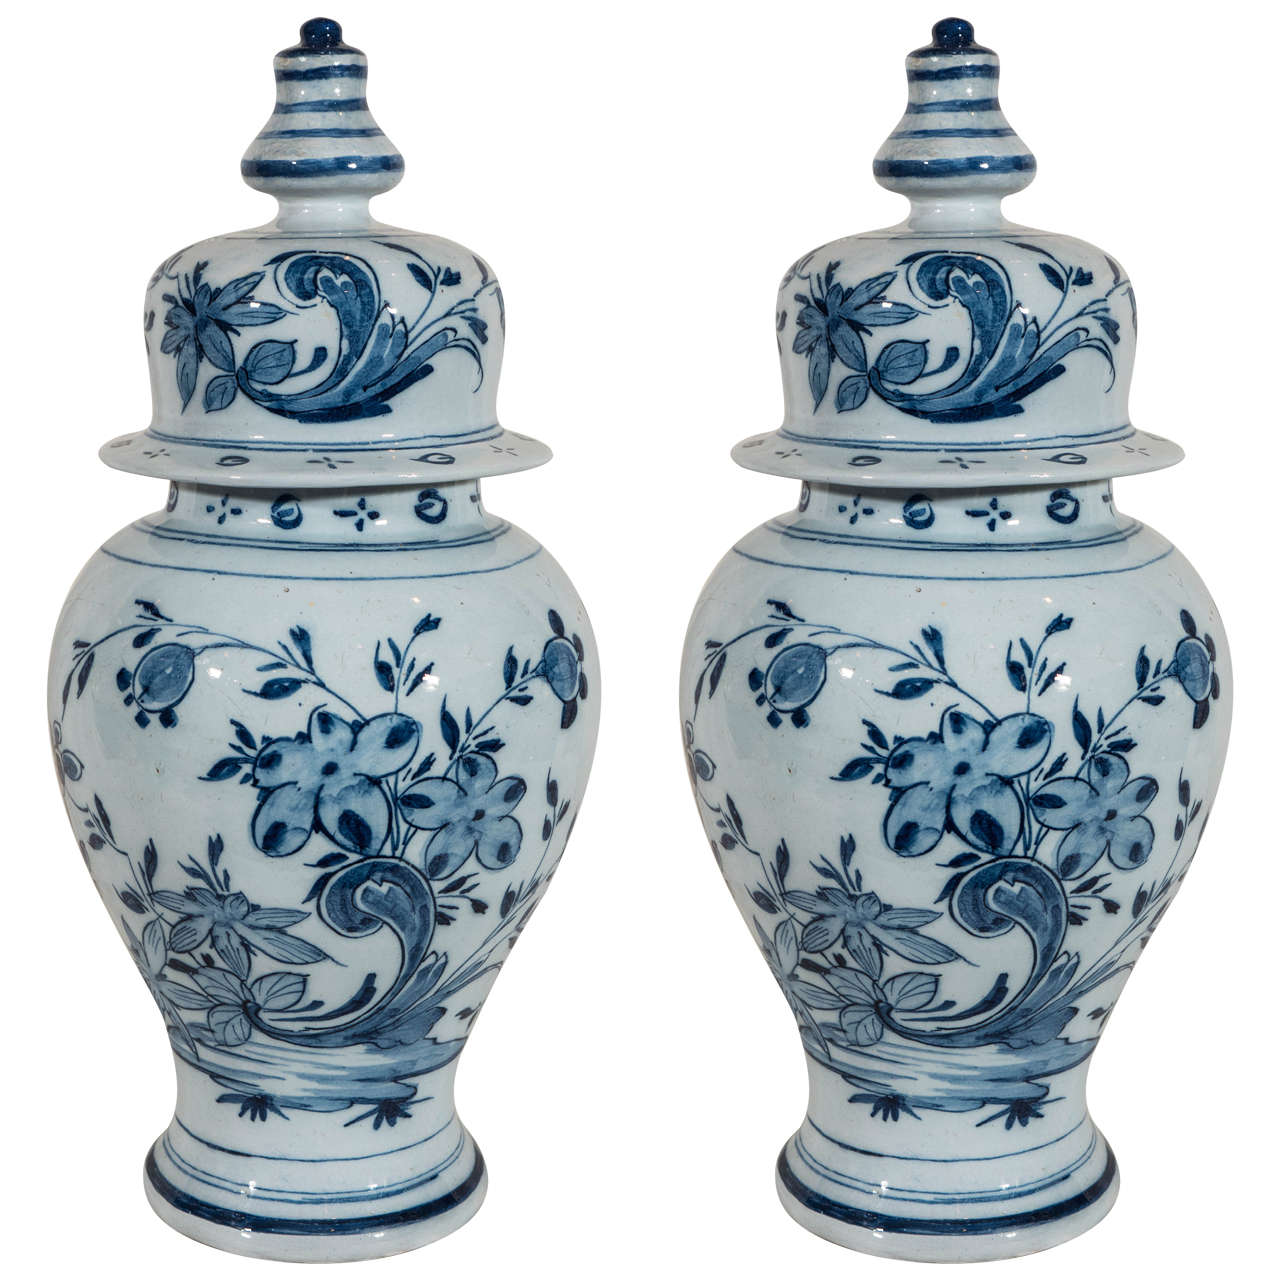 Pair of 18th Century Blue and White Dutch Delft Covered Vases